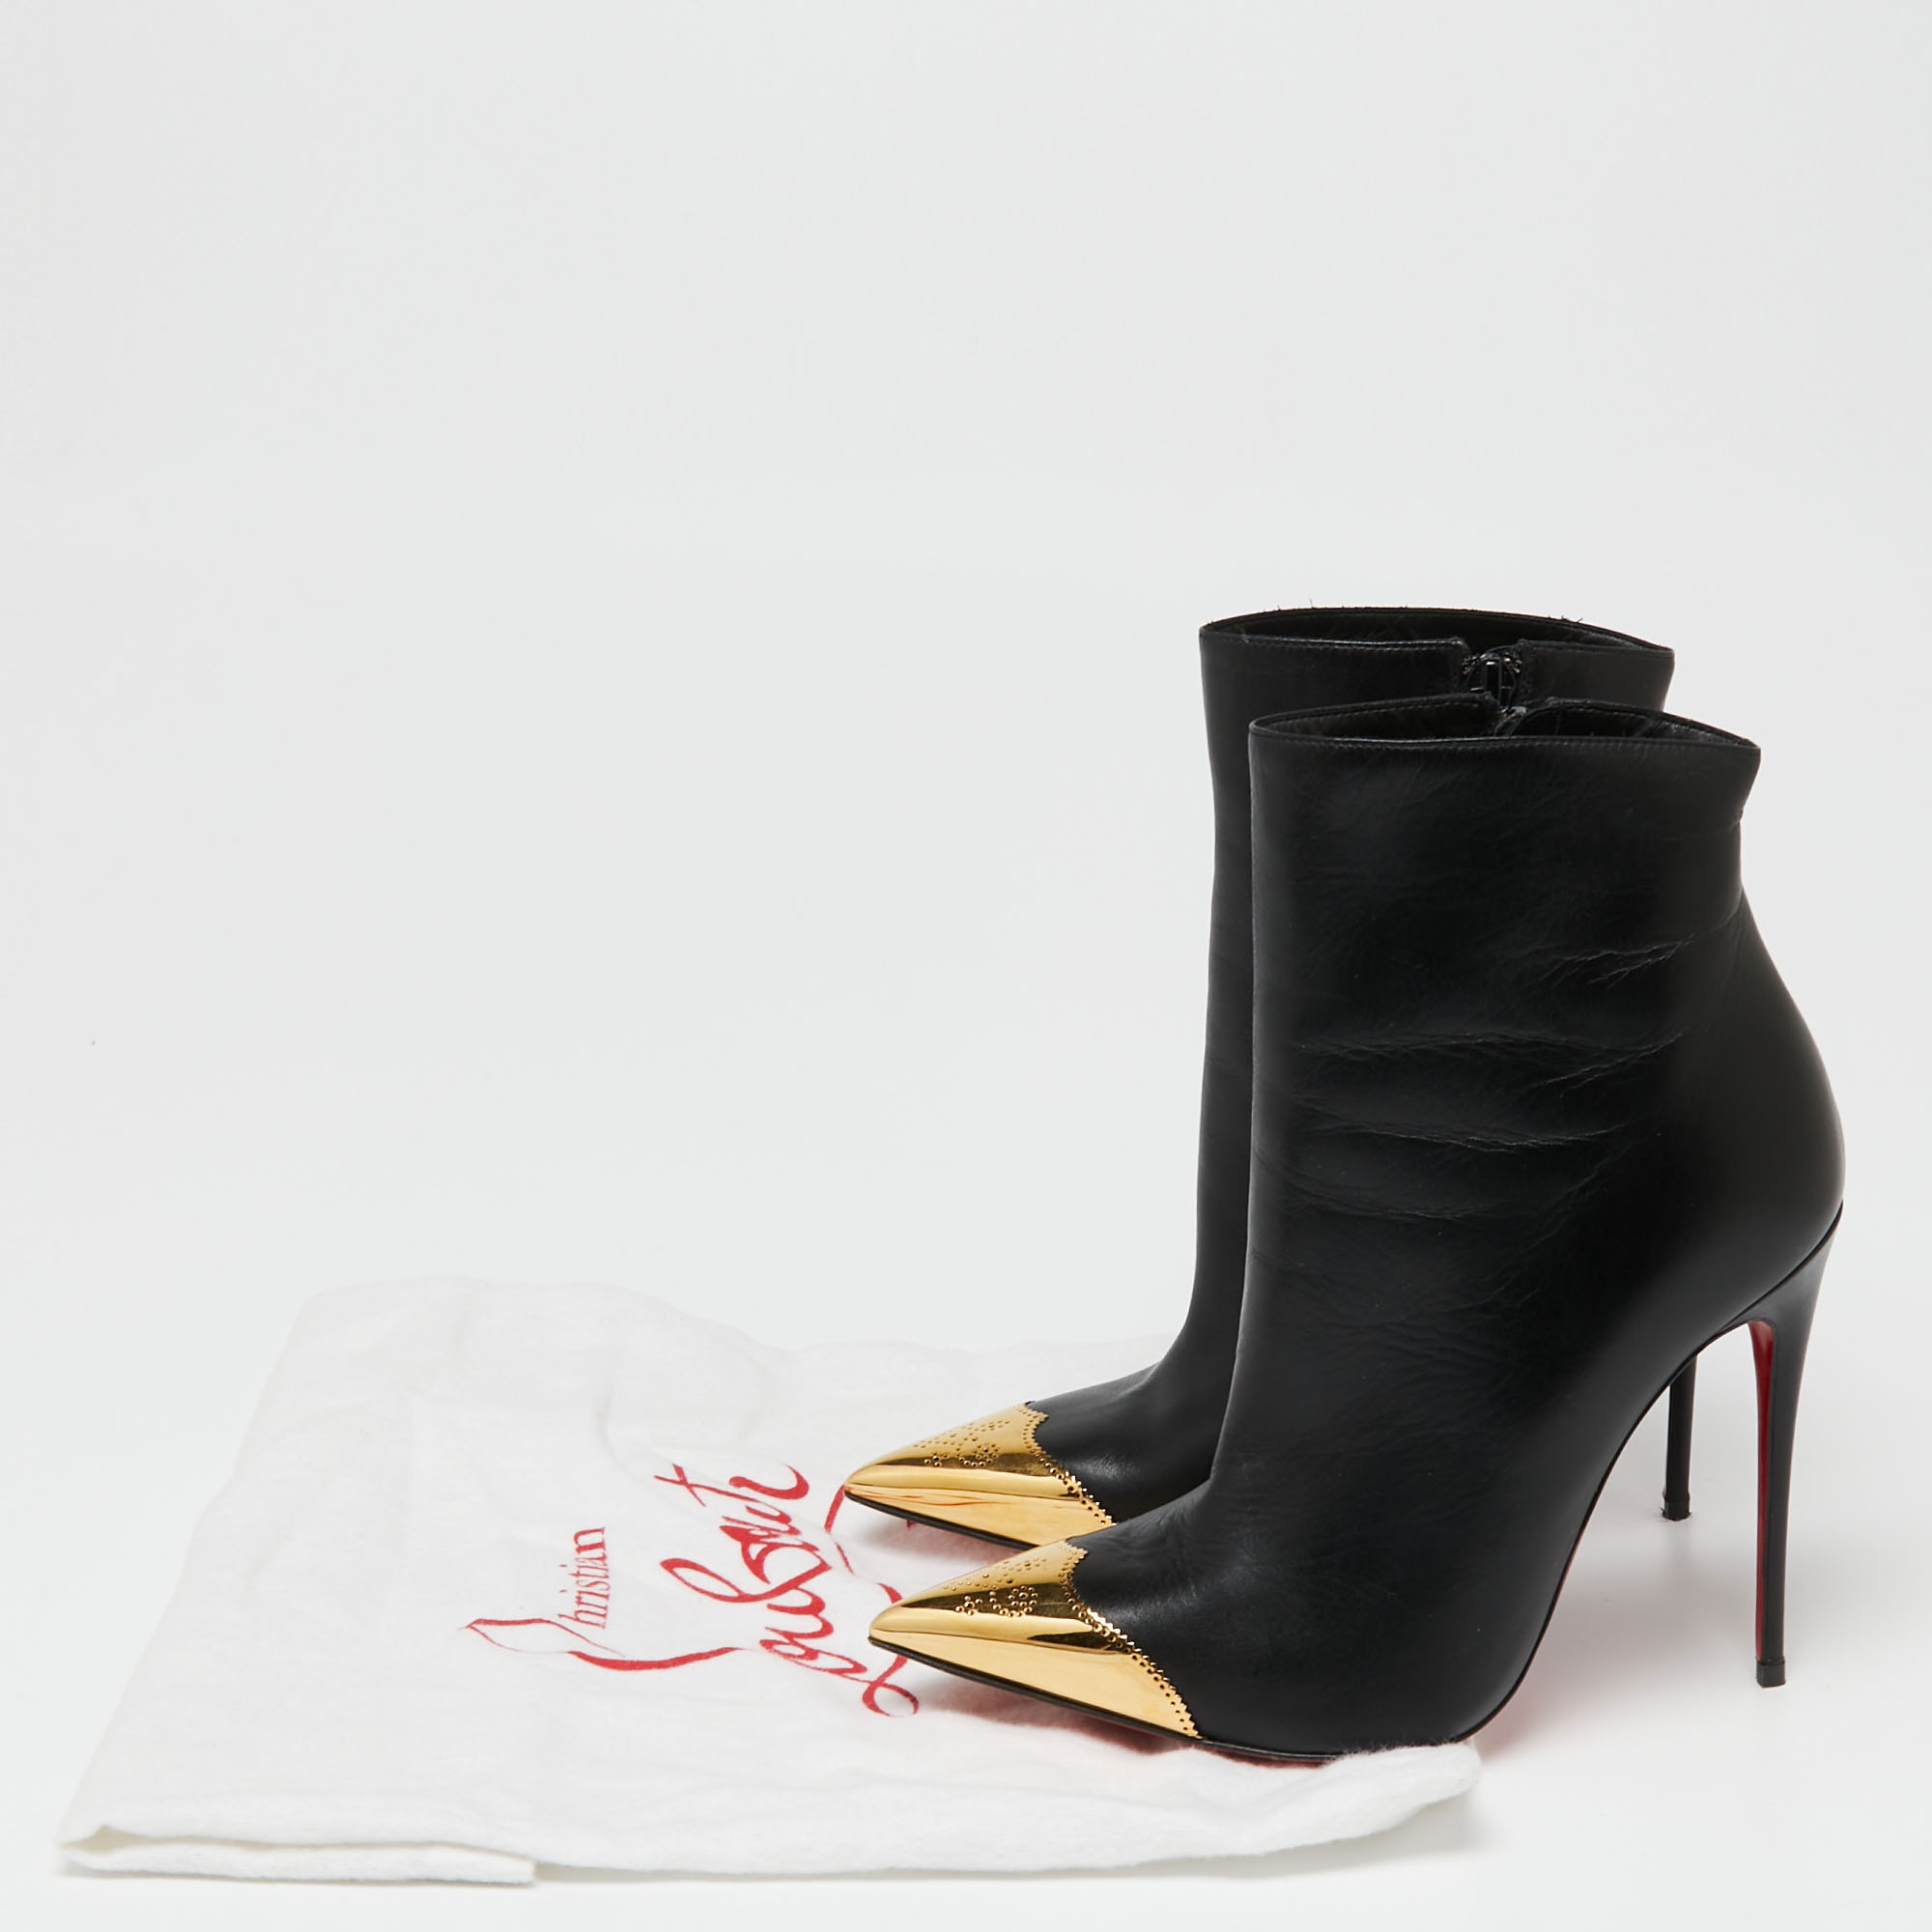 Christian Louboutin Black Leather Calamijane Pointed-Toe Ankle Booties Size 35.5